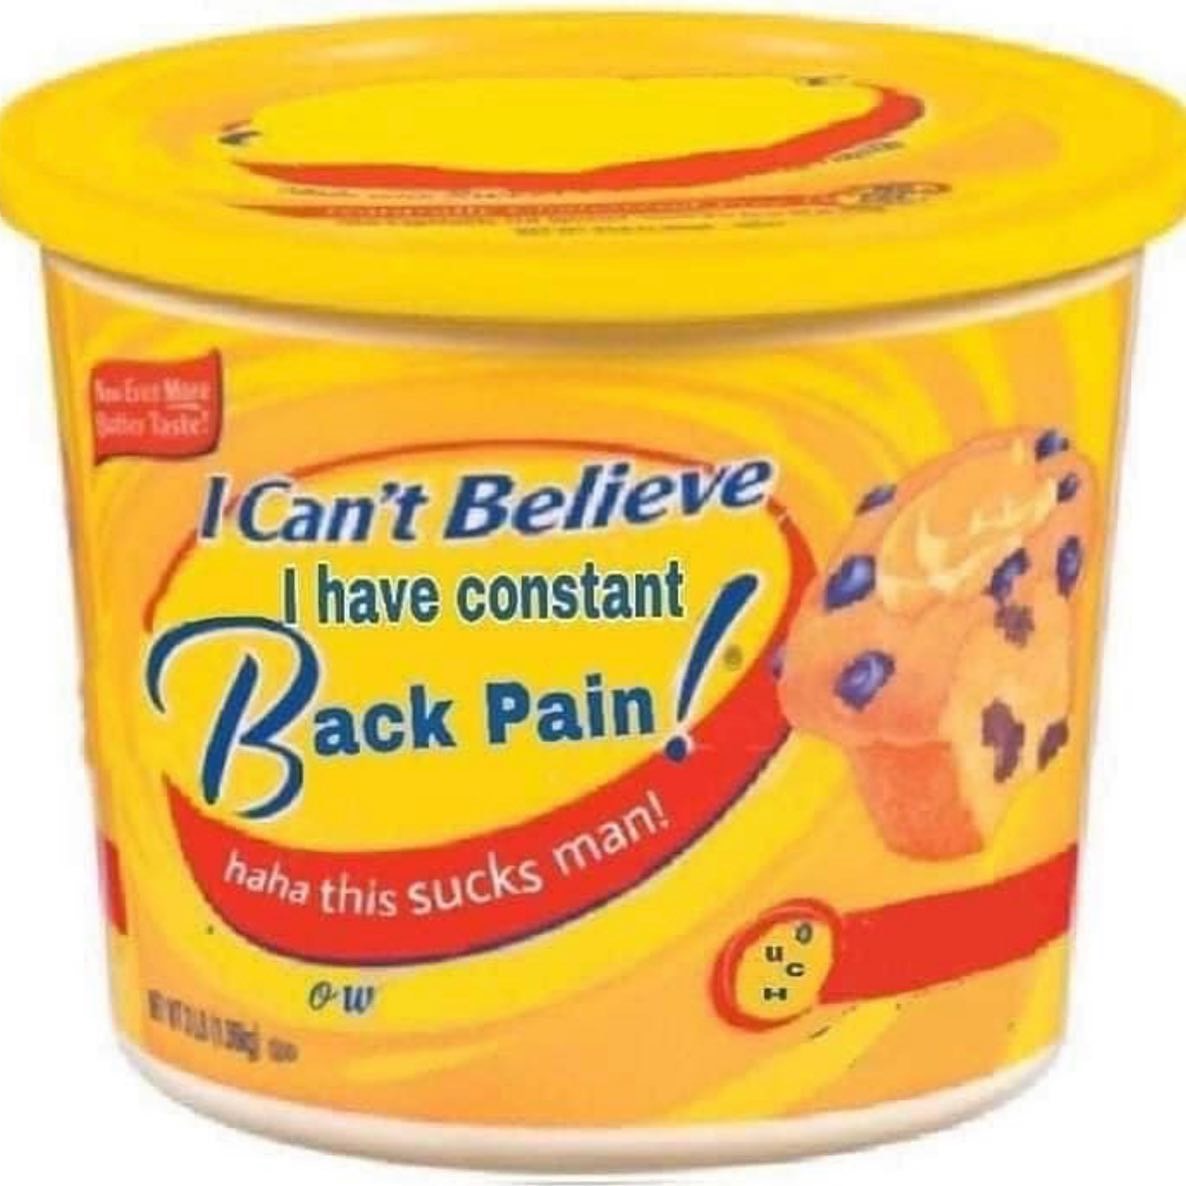 wow i cant believe its not butter - I Can't Believe I have constant ack Pain haha this sucks Sucks man! 0W